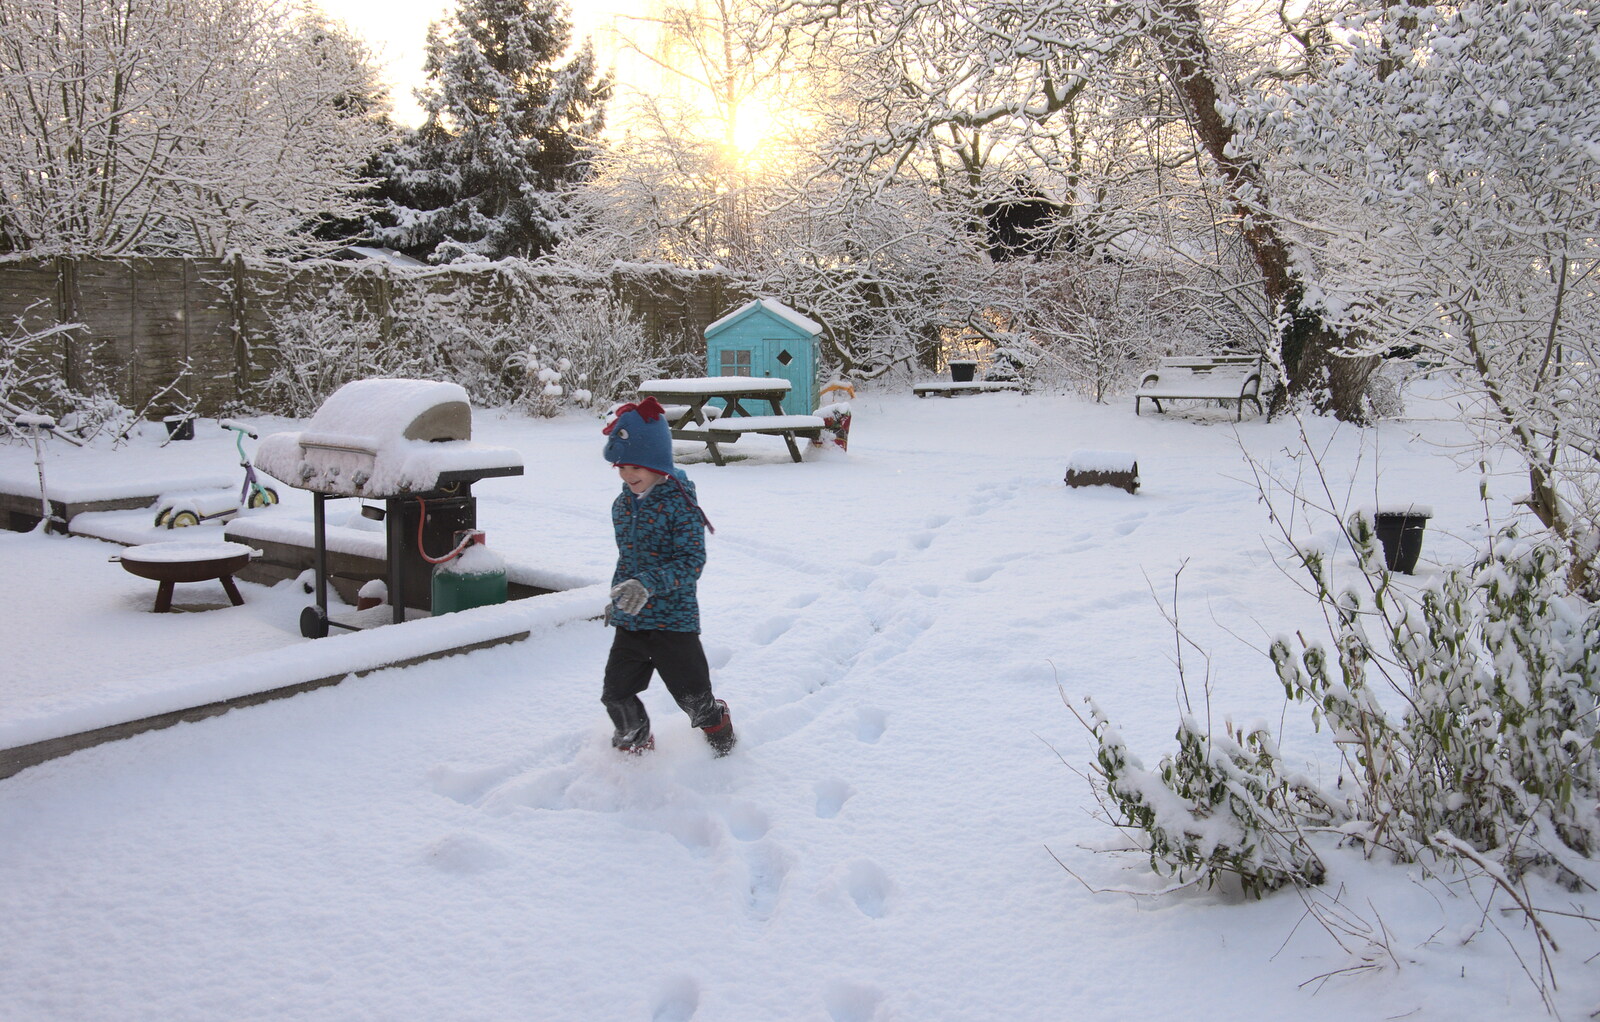 Snowmageddon: The Beast From the East, Suffolk and London - 27th February 2018: Harry plays in the garden